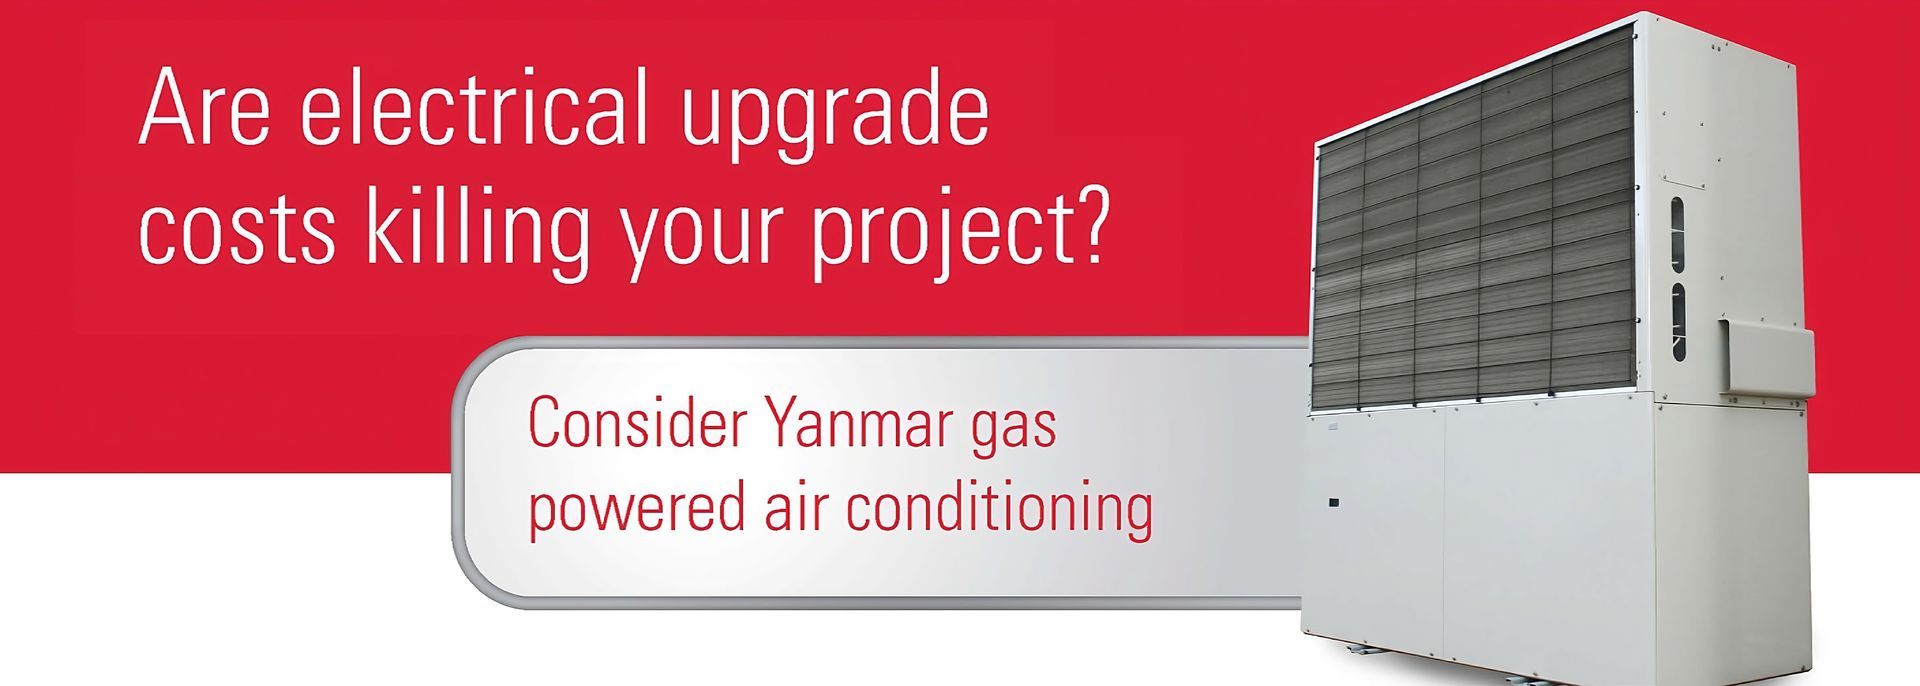 Are Electrical Costs Killing Your Project? Consider Yanmar Gas Powered Air Conditioning